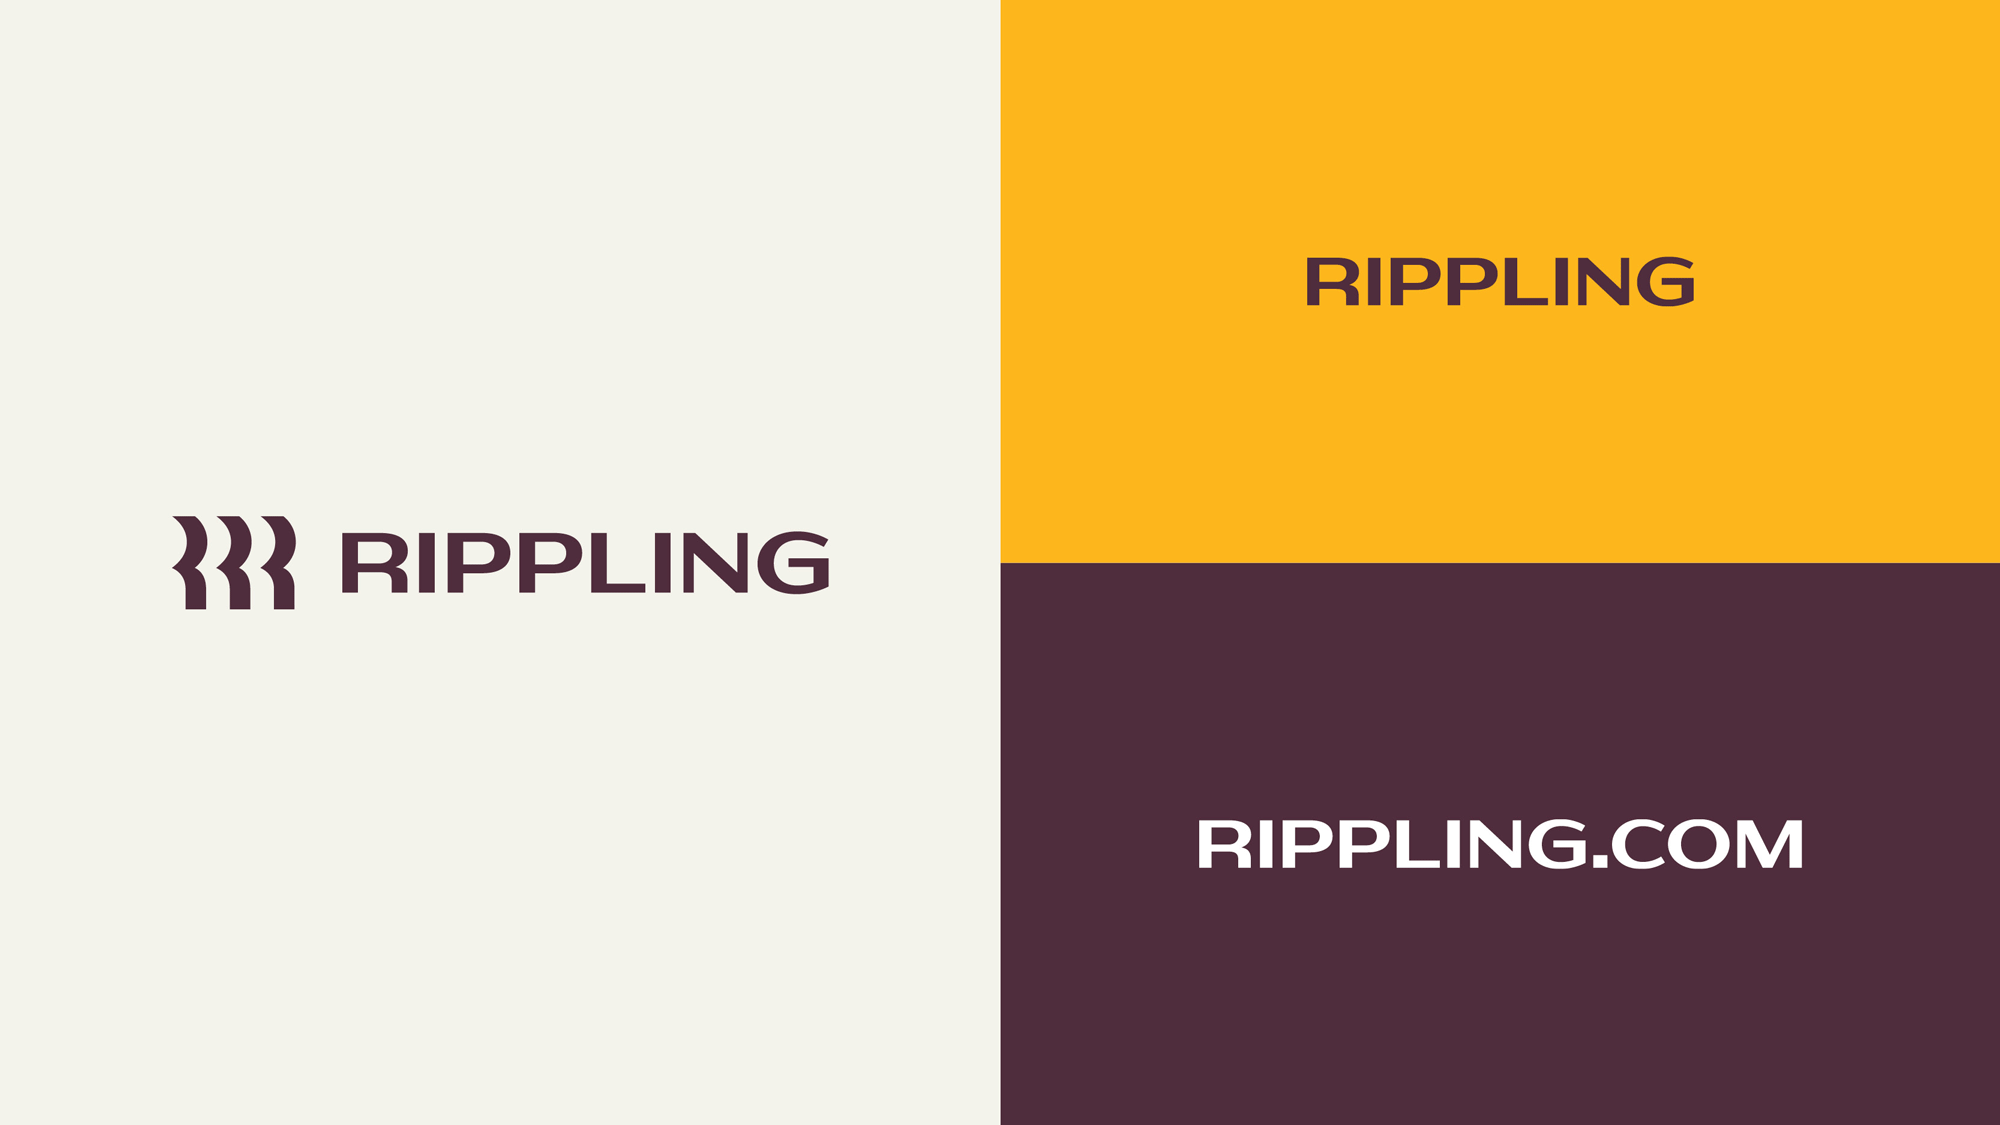 New Logo and Identity for Rippling done In-house